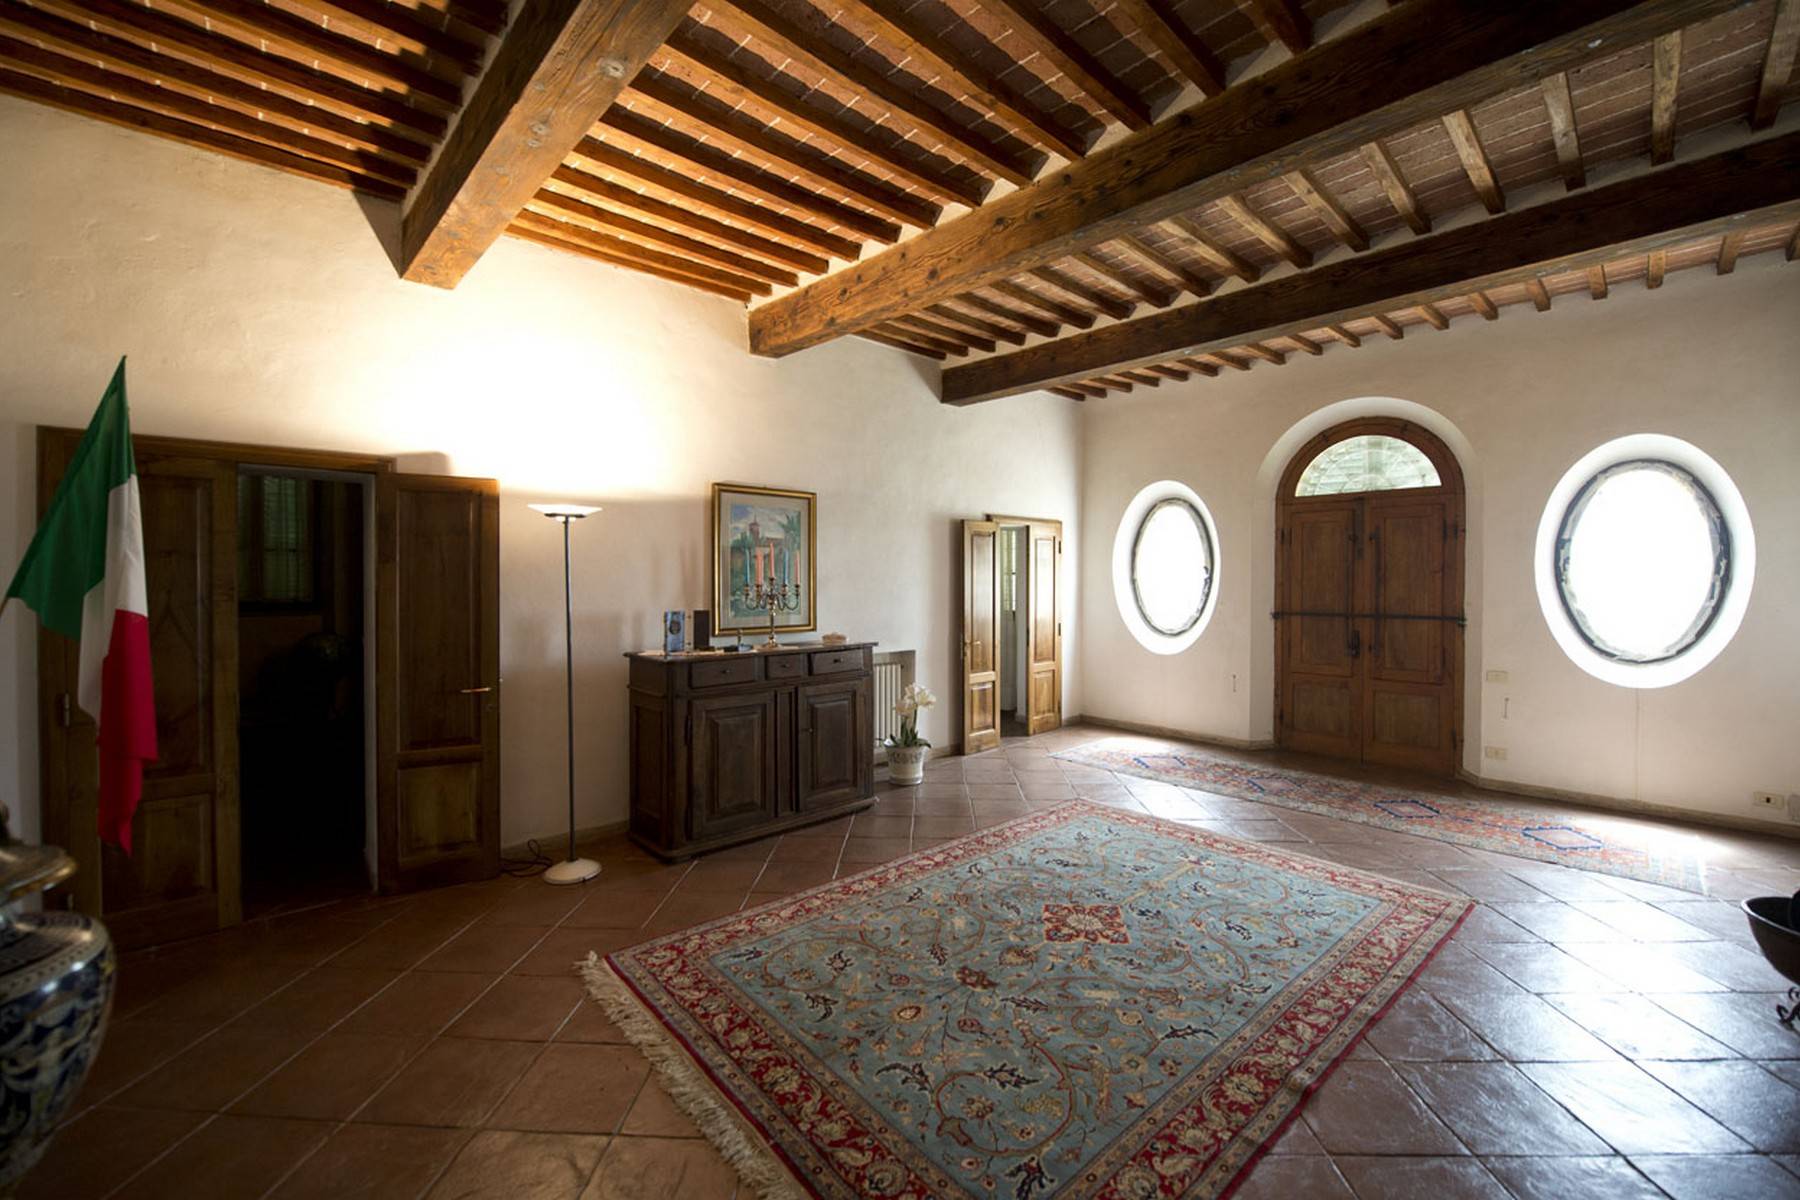 Aristocratic Villa for Sale on the Hills of Siena - 6